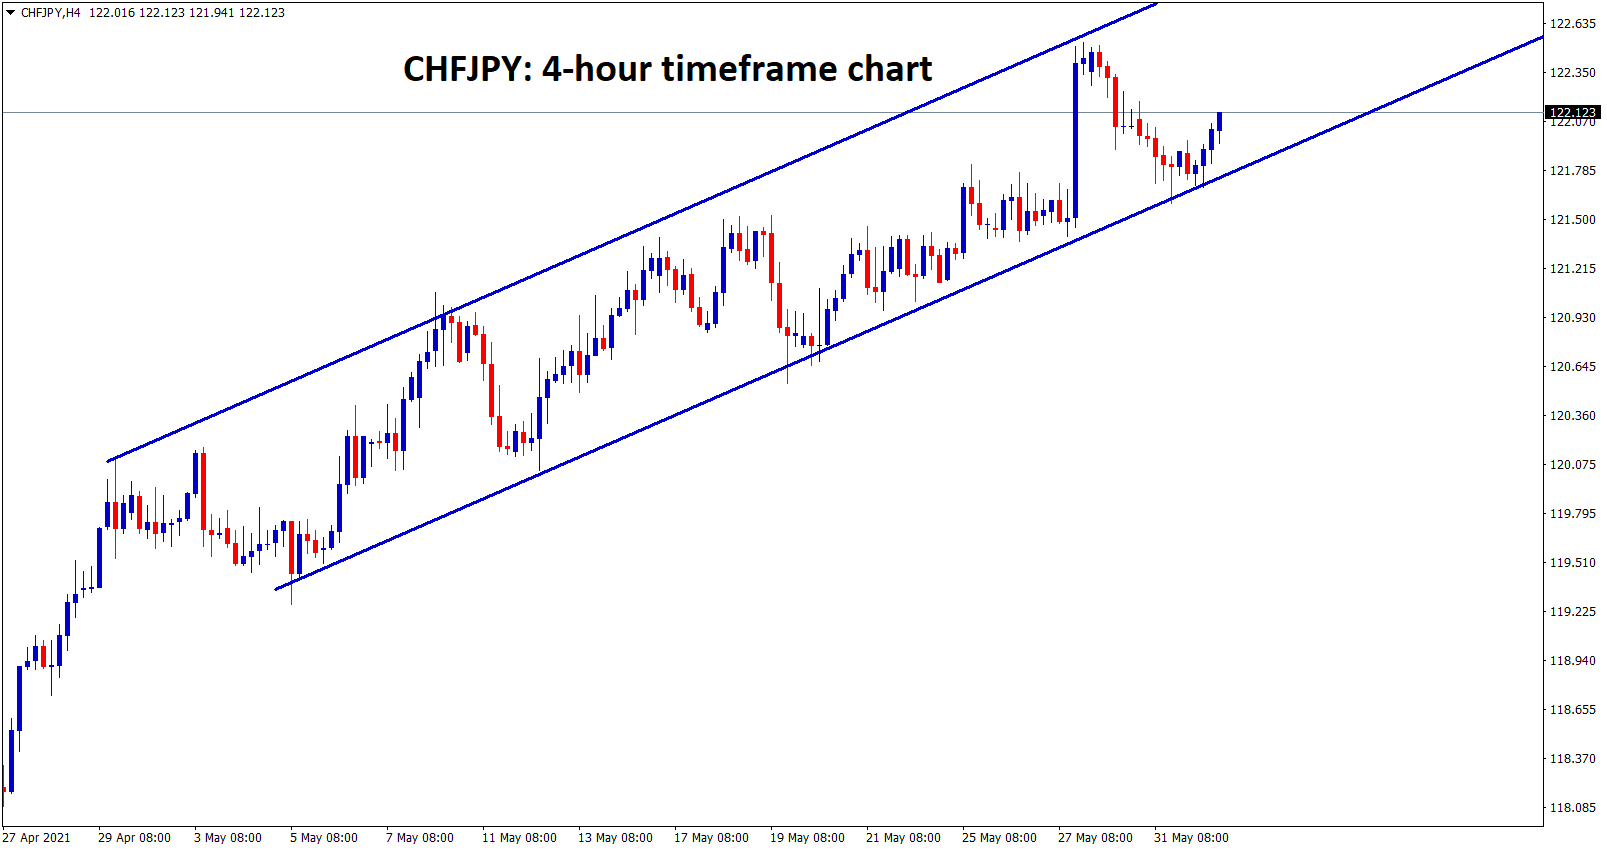 CHFJPY is moving in an uptrend forming higher high and higher low areas